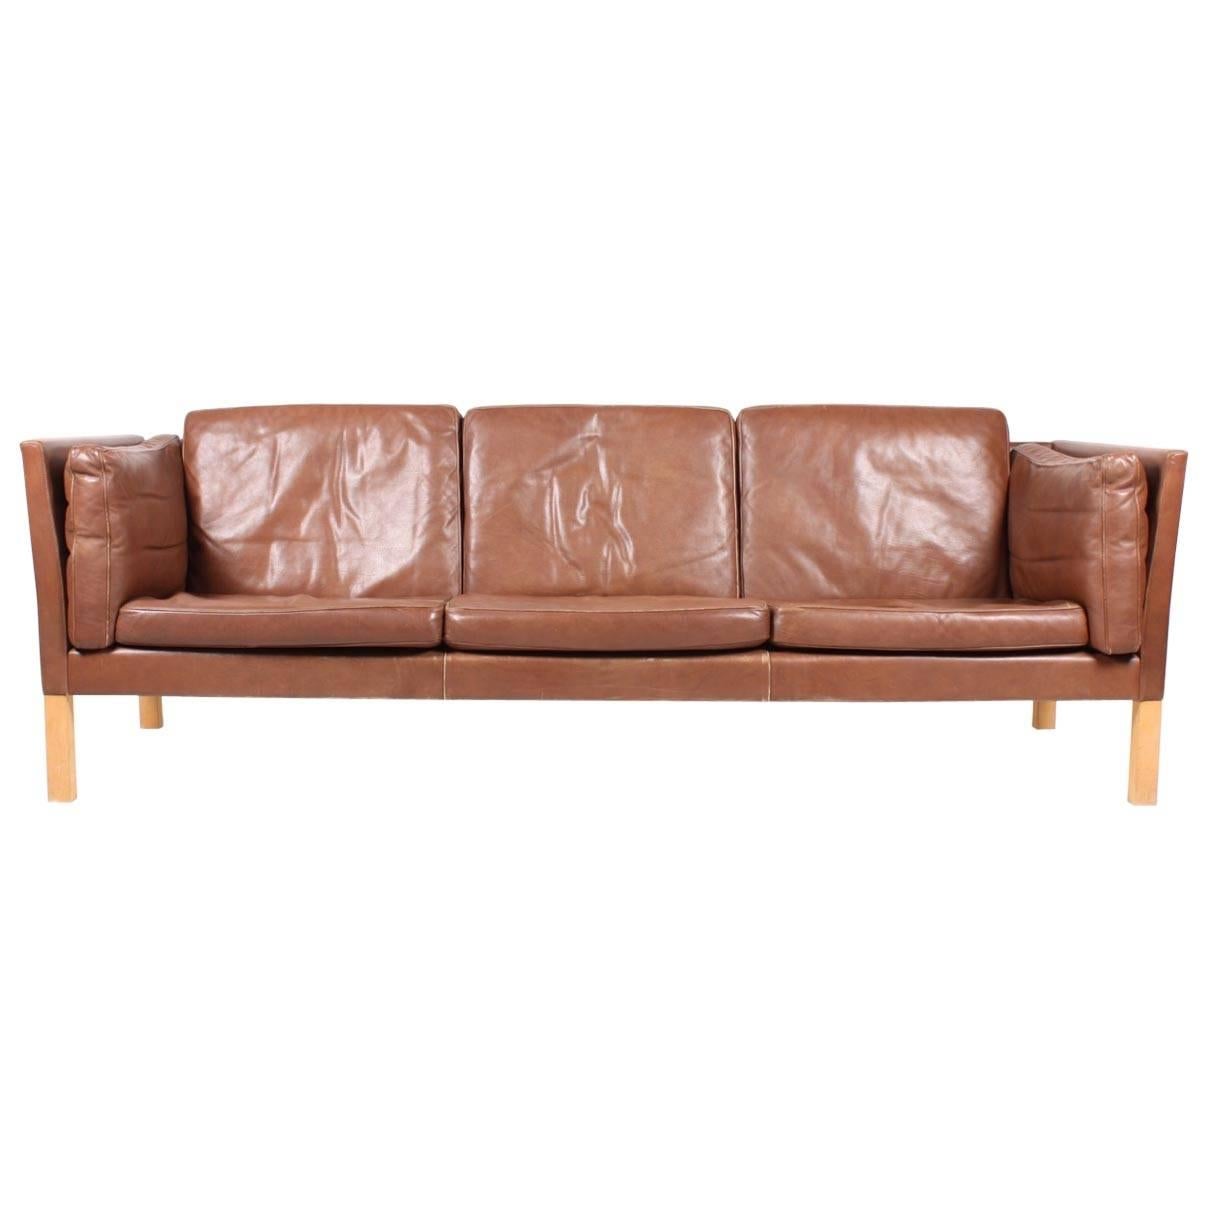 Ivan Schlechter Sofa in Patinated Leather